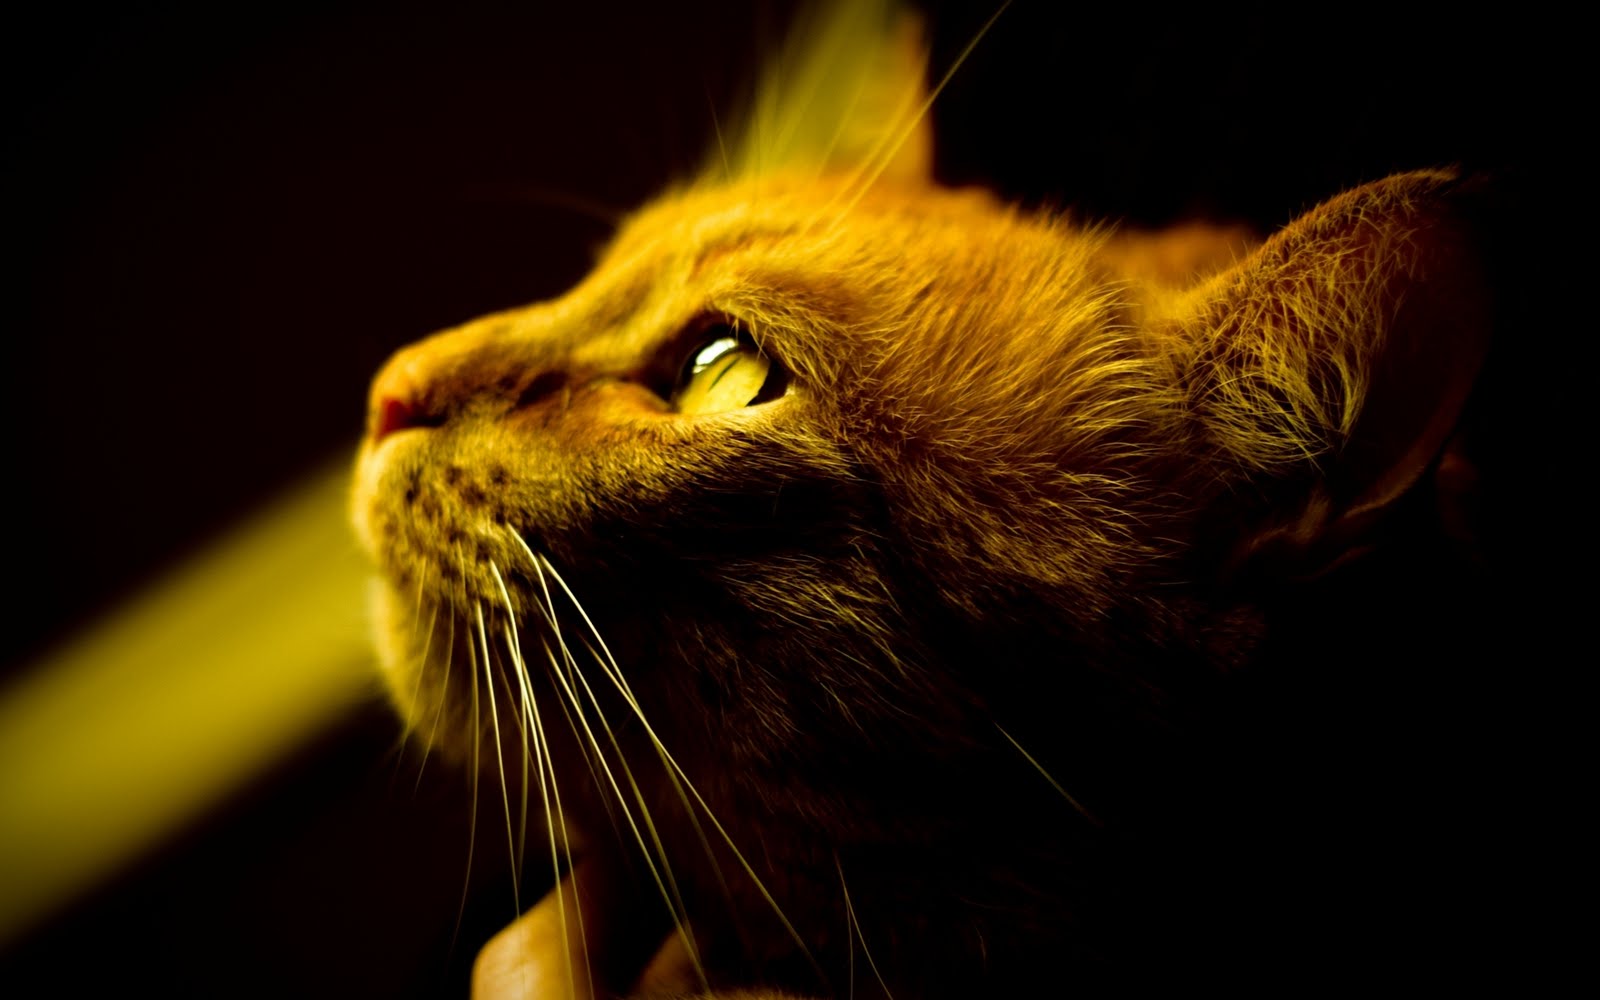 cat in the light cool eye 1080p hd wallpaper is a great wallpaper for 1600x1000